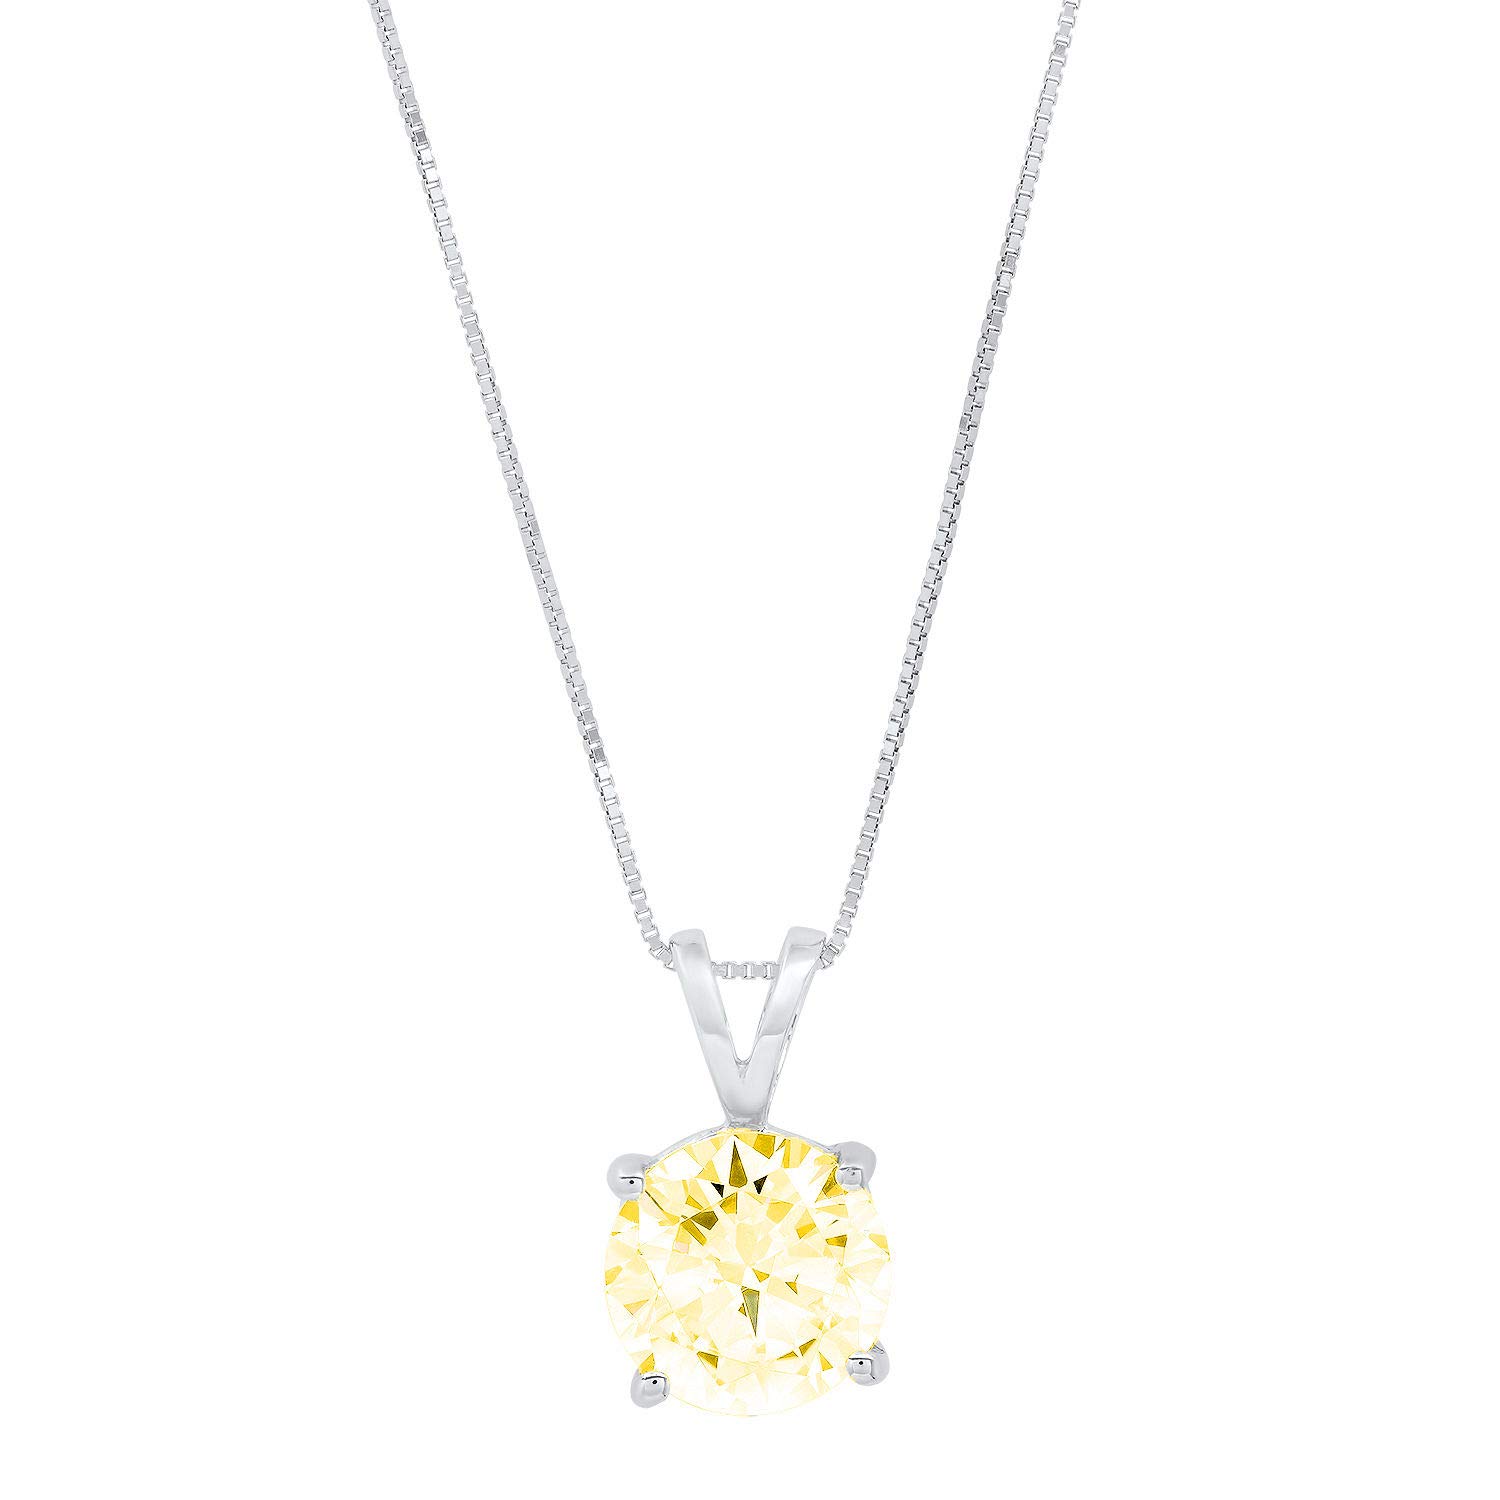 Clara Pucci 0.50 ct Brilliant Round Cut Stunning Genuine Flawless Yellow Simulated Diamond Gemstone Solitaire Pendant Necklace With 18